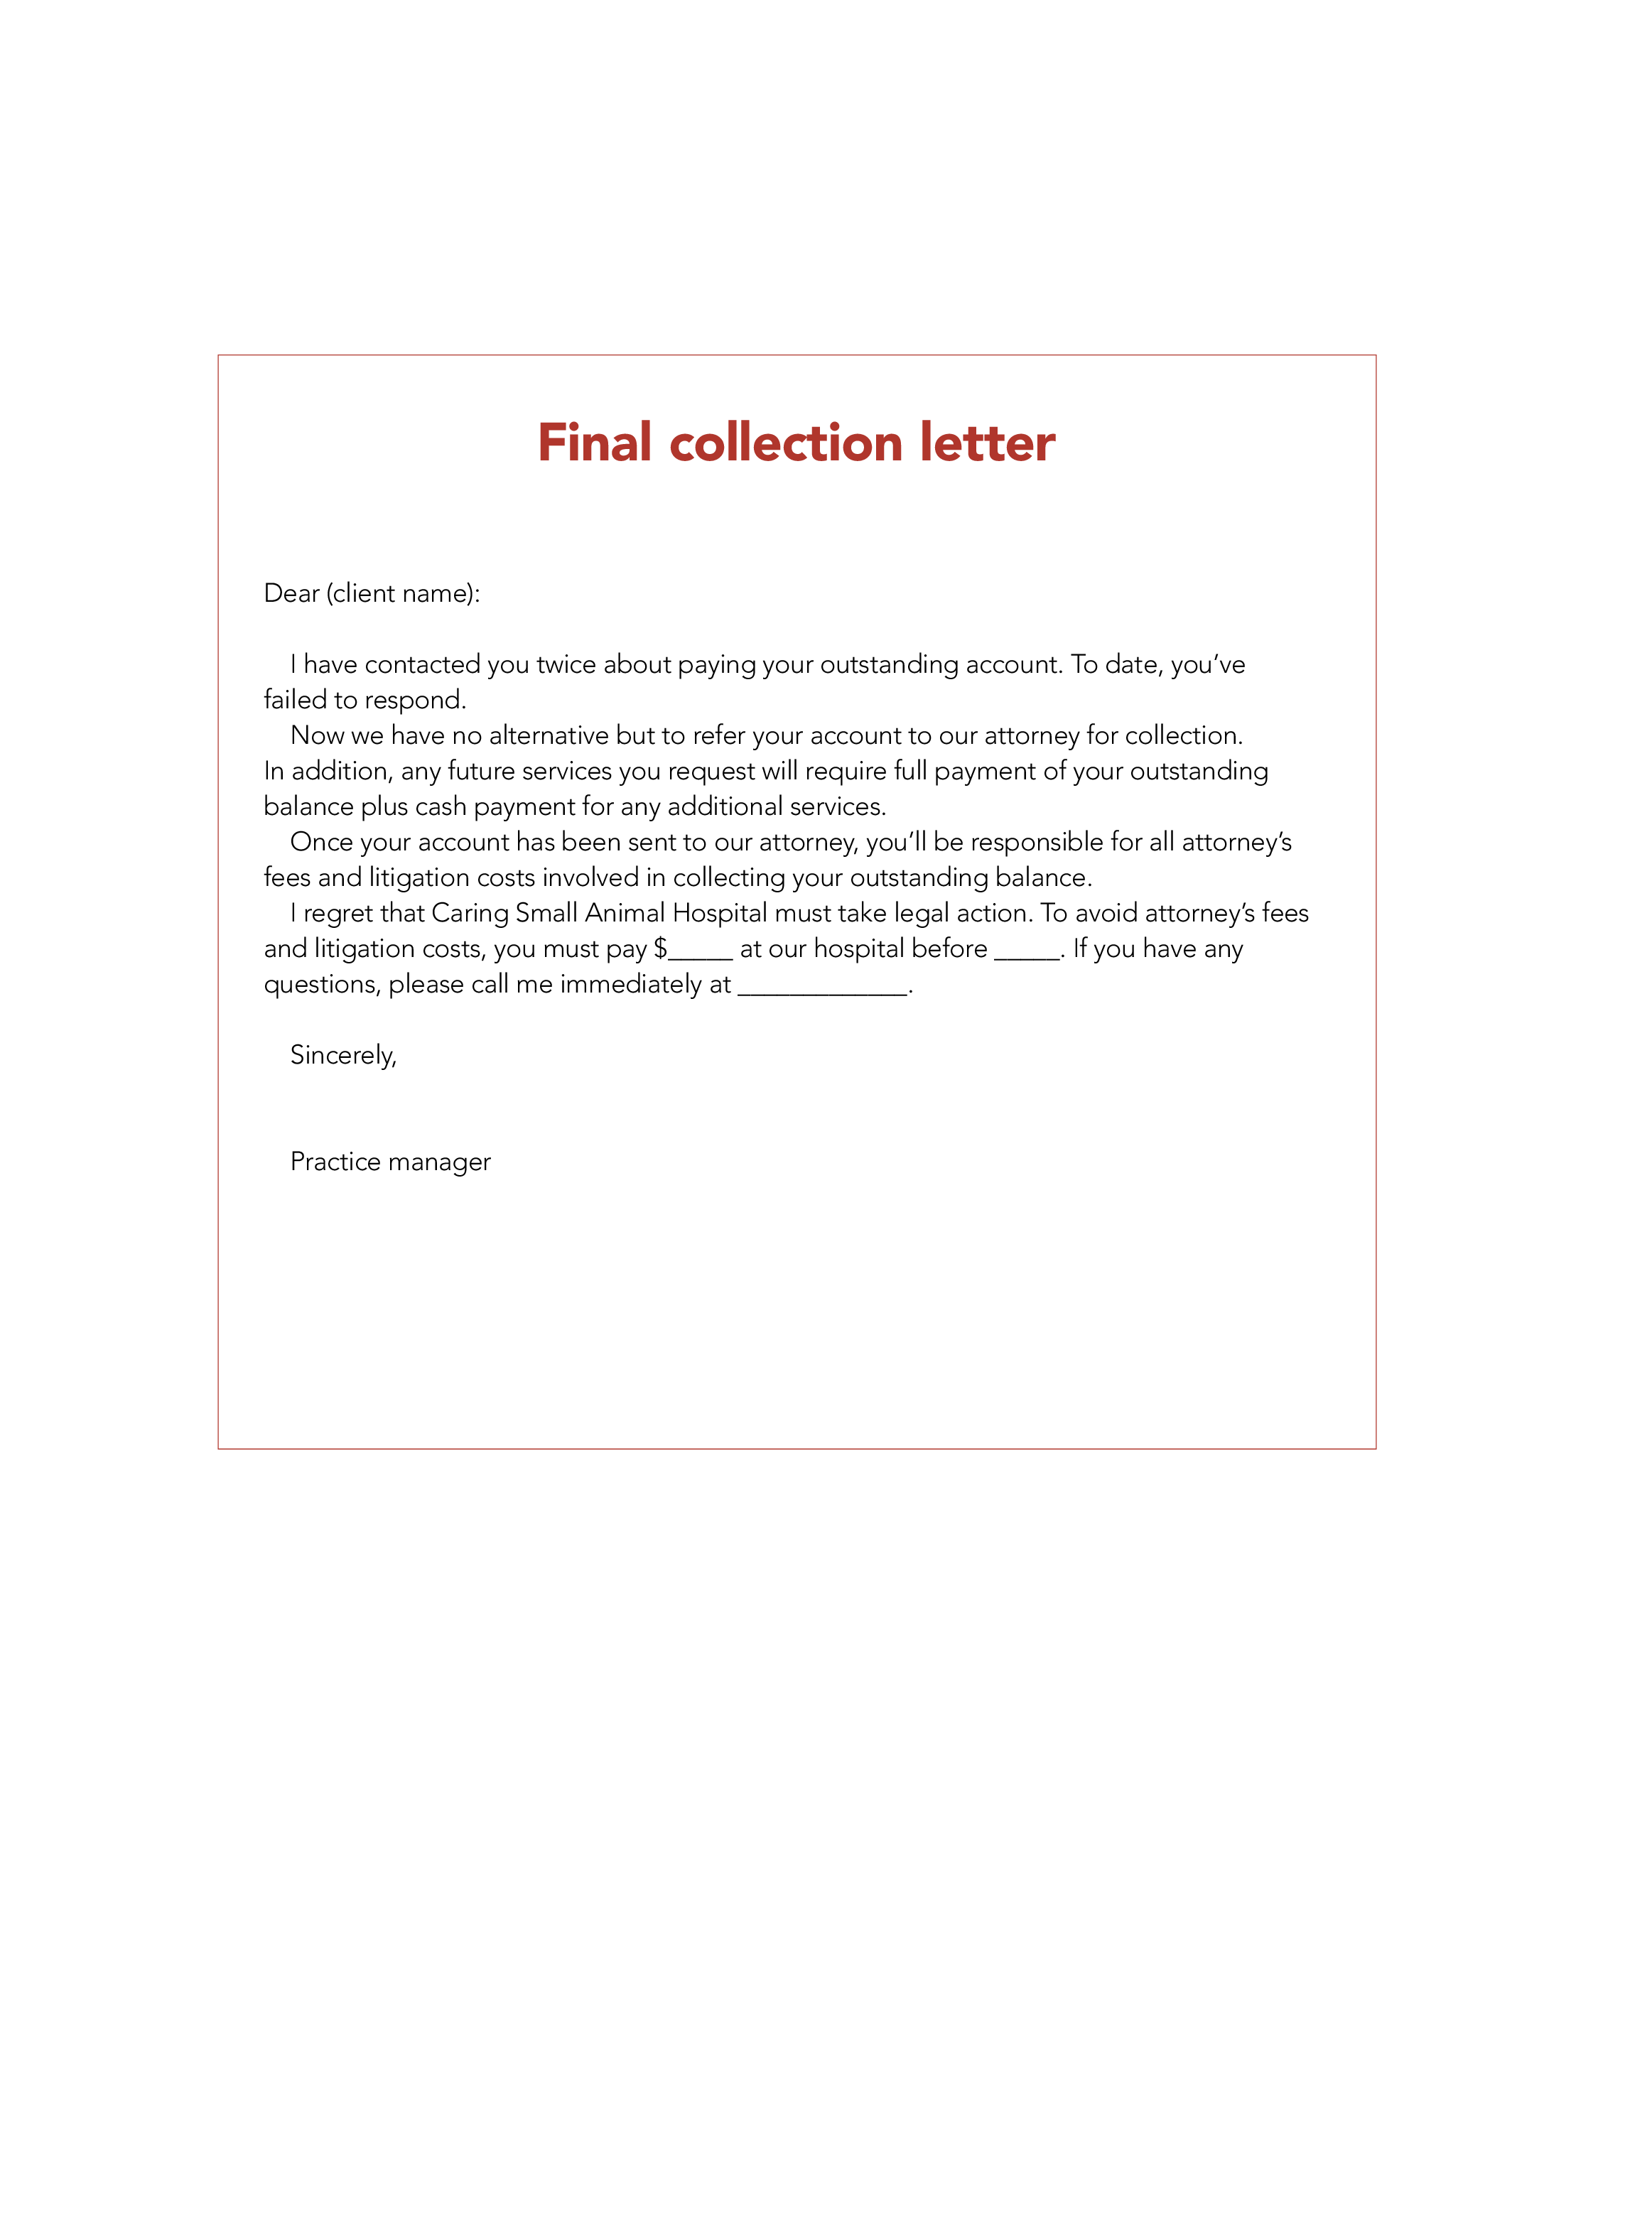 Final Collection Letter 模板